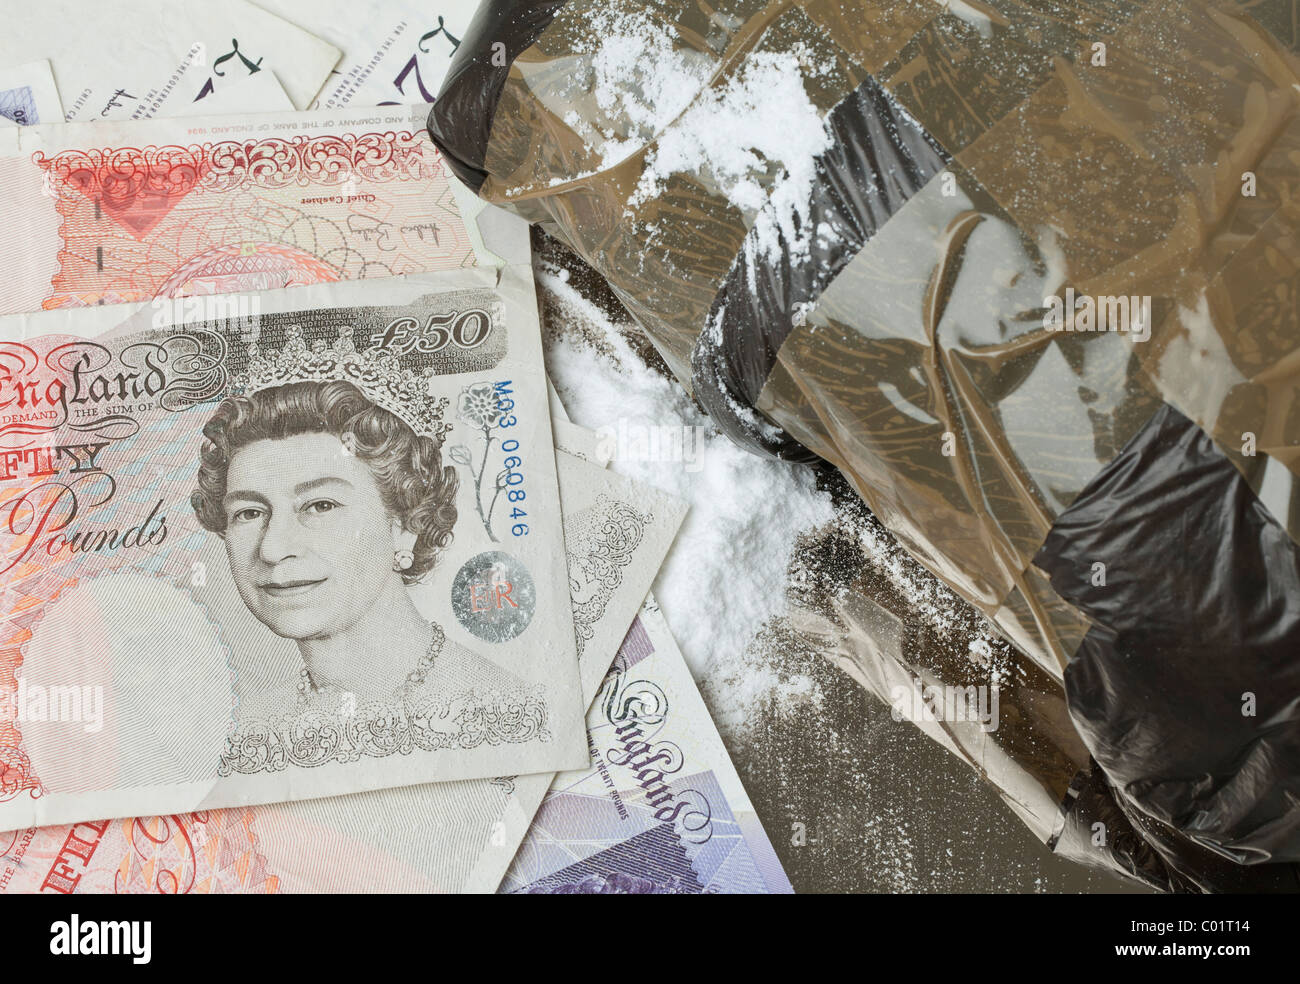 a black plastic packet sealed with brown tape containing white powder (drugs) on  a mirror together with some English bank notes Stock Photo